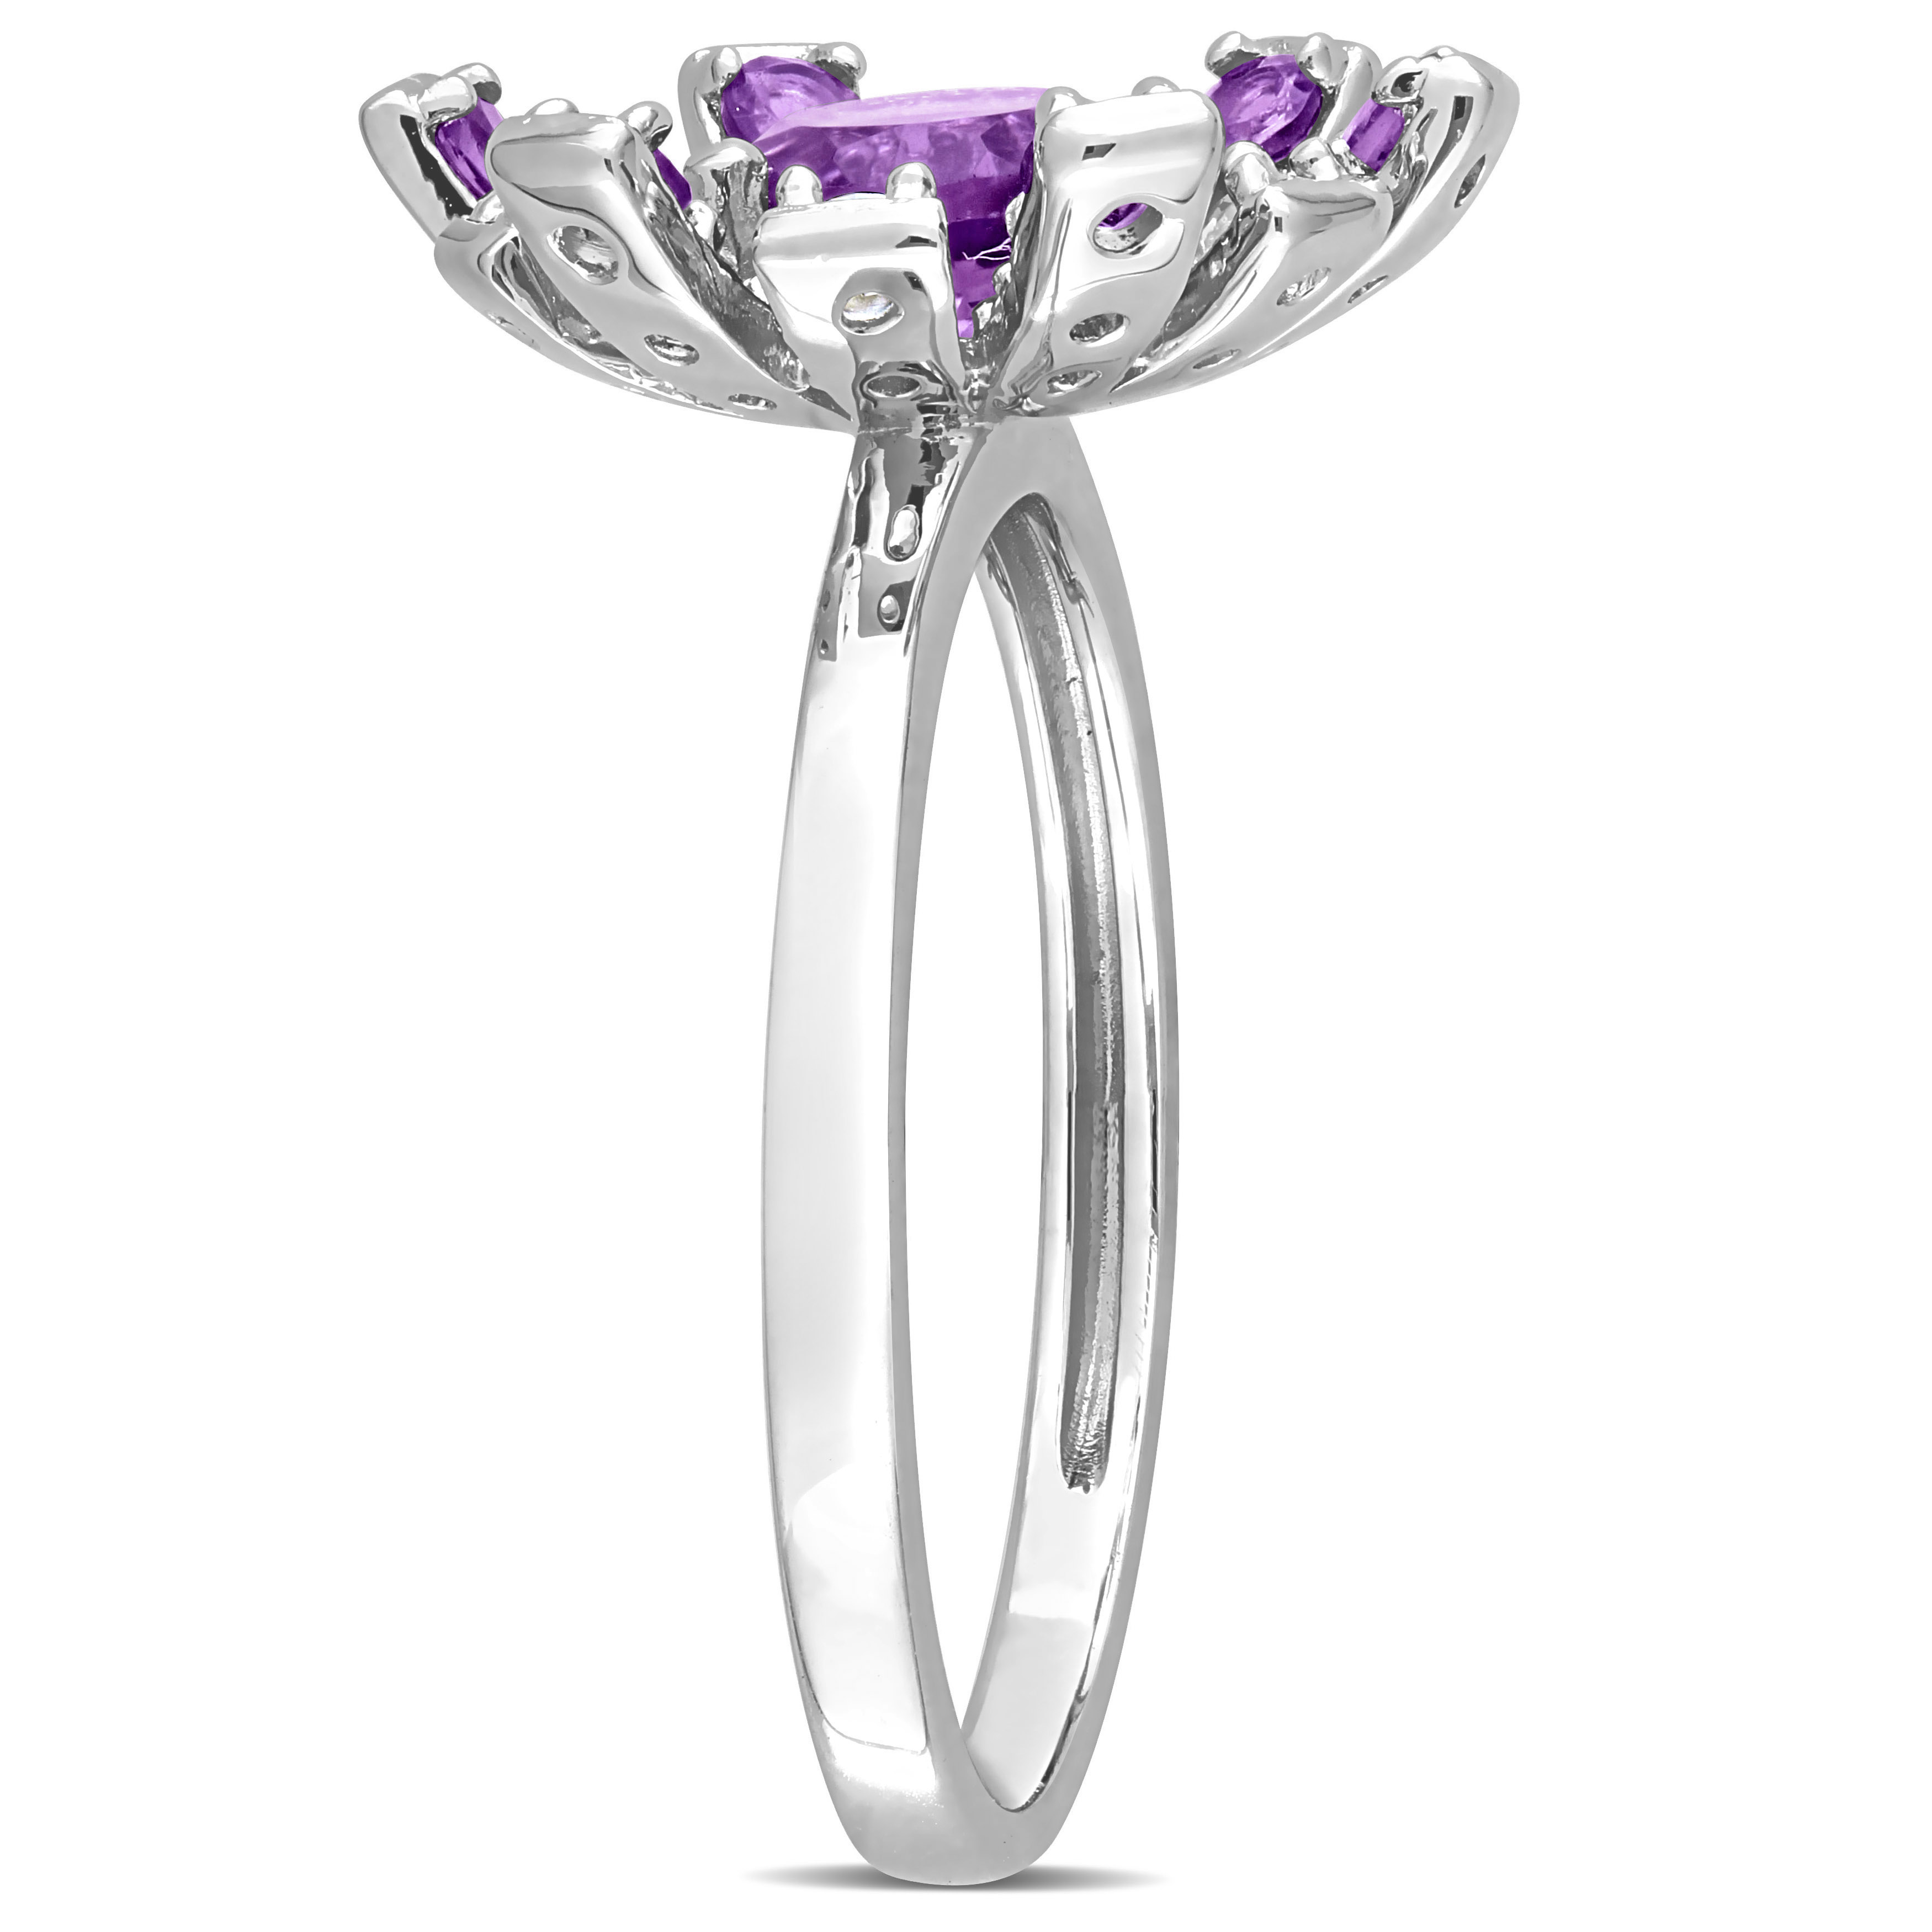 1 3/8 CT TGW African Amethyst and White Topaz Starburst Cocktail Ring in Sterling Silver